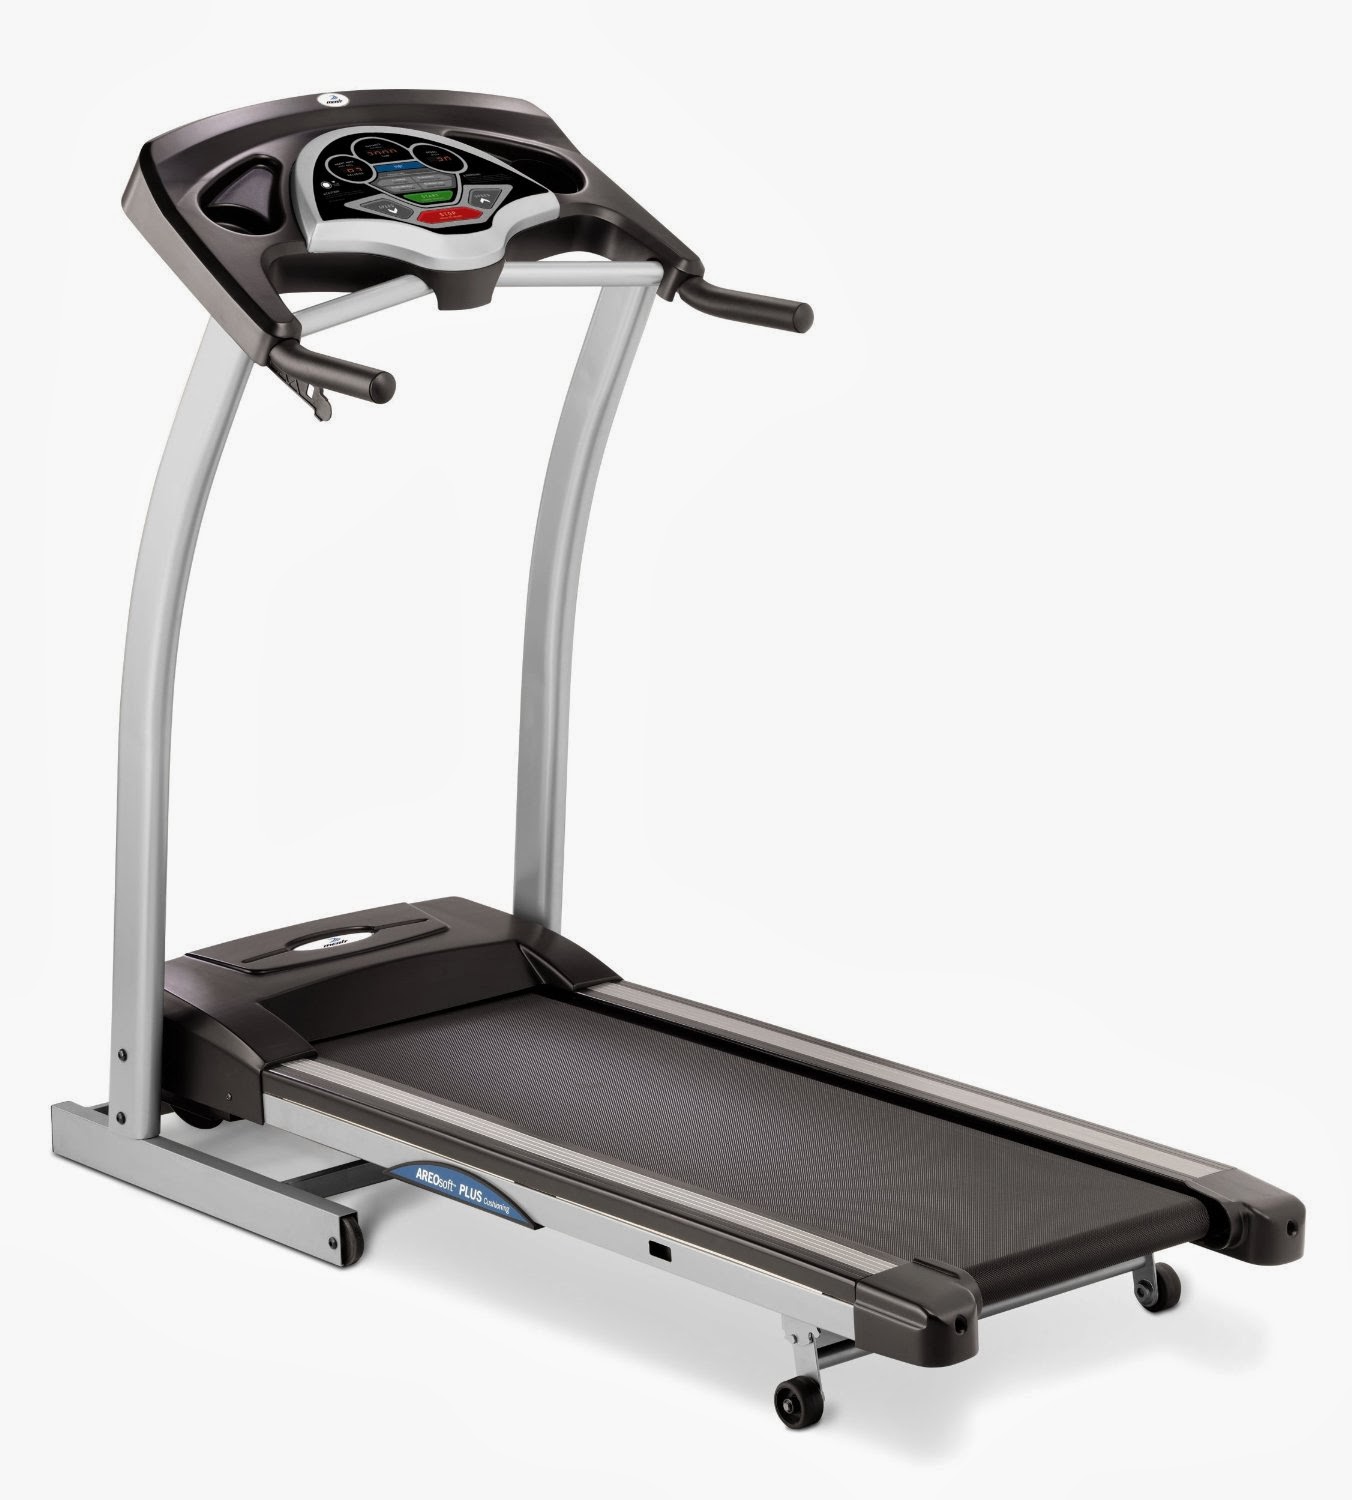 Merit Fitness 715T Treadmill versus Merit Fitness 725T Treadmill, compare features and differences, buy at low price